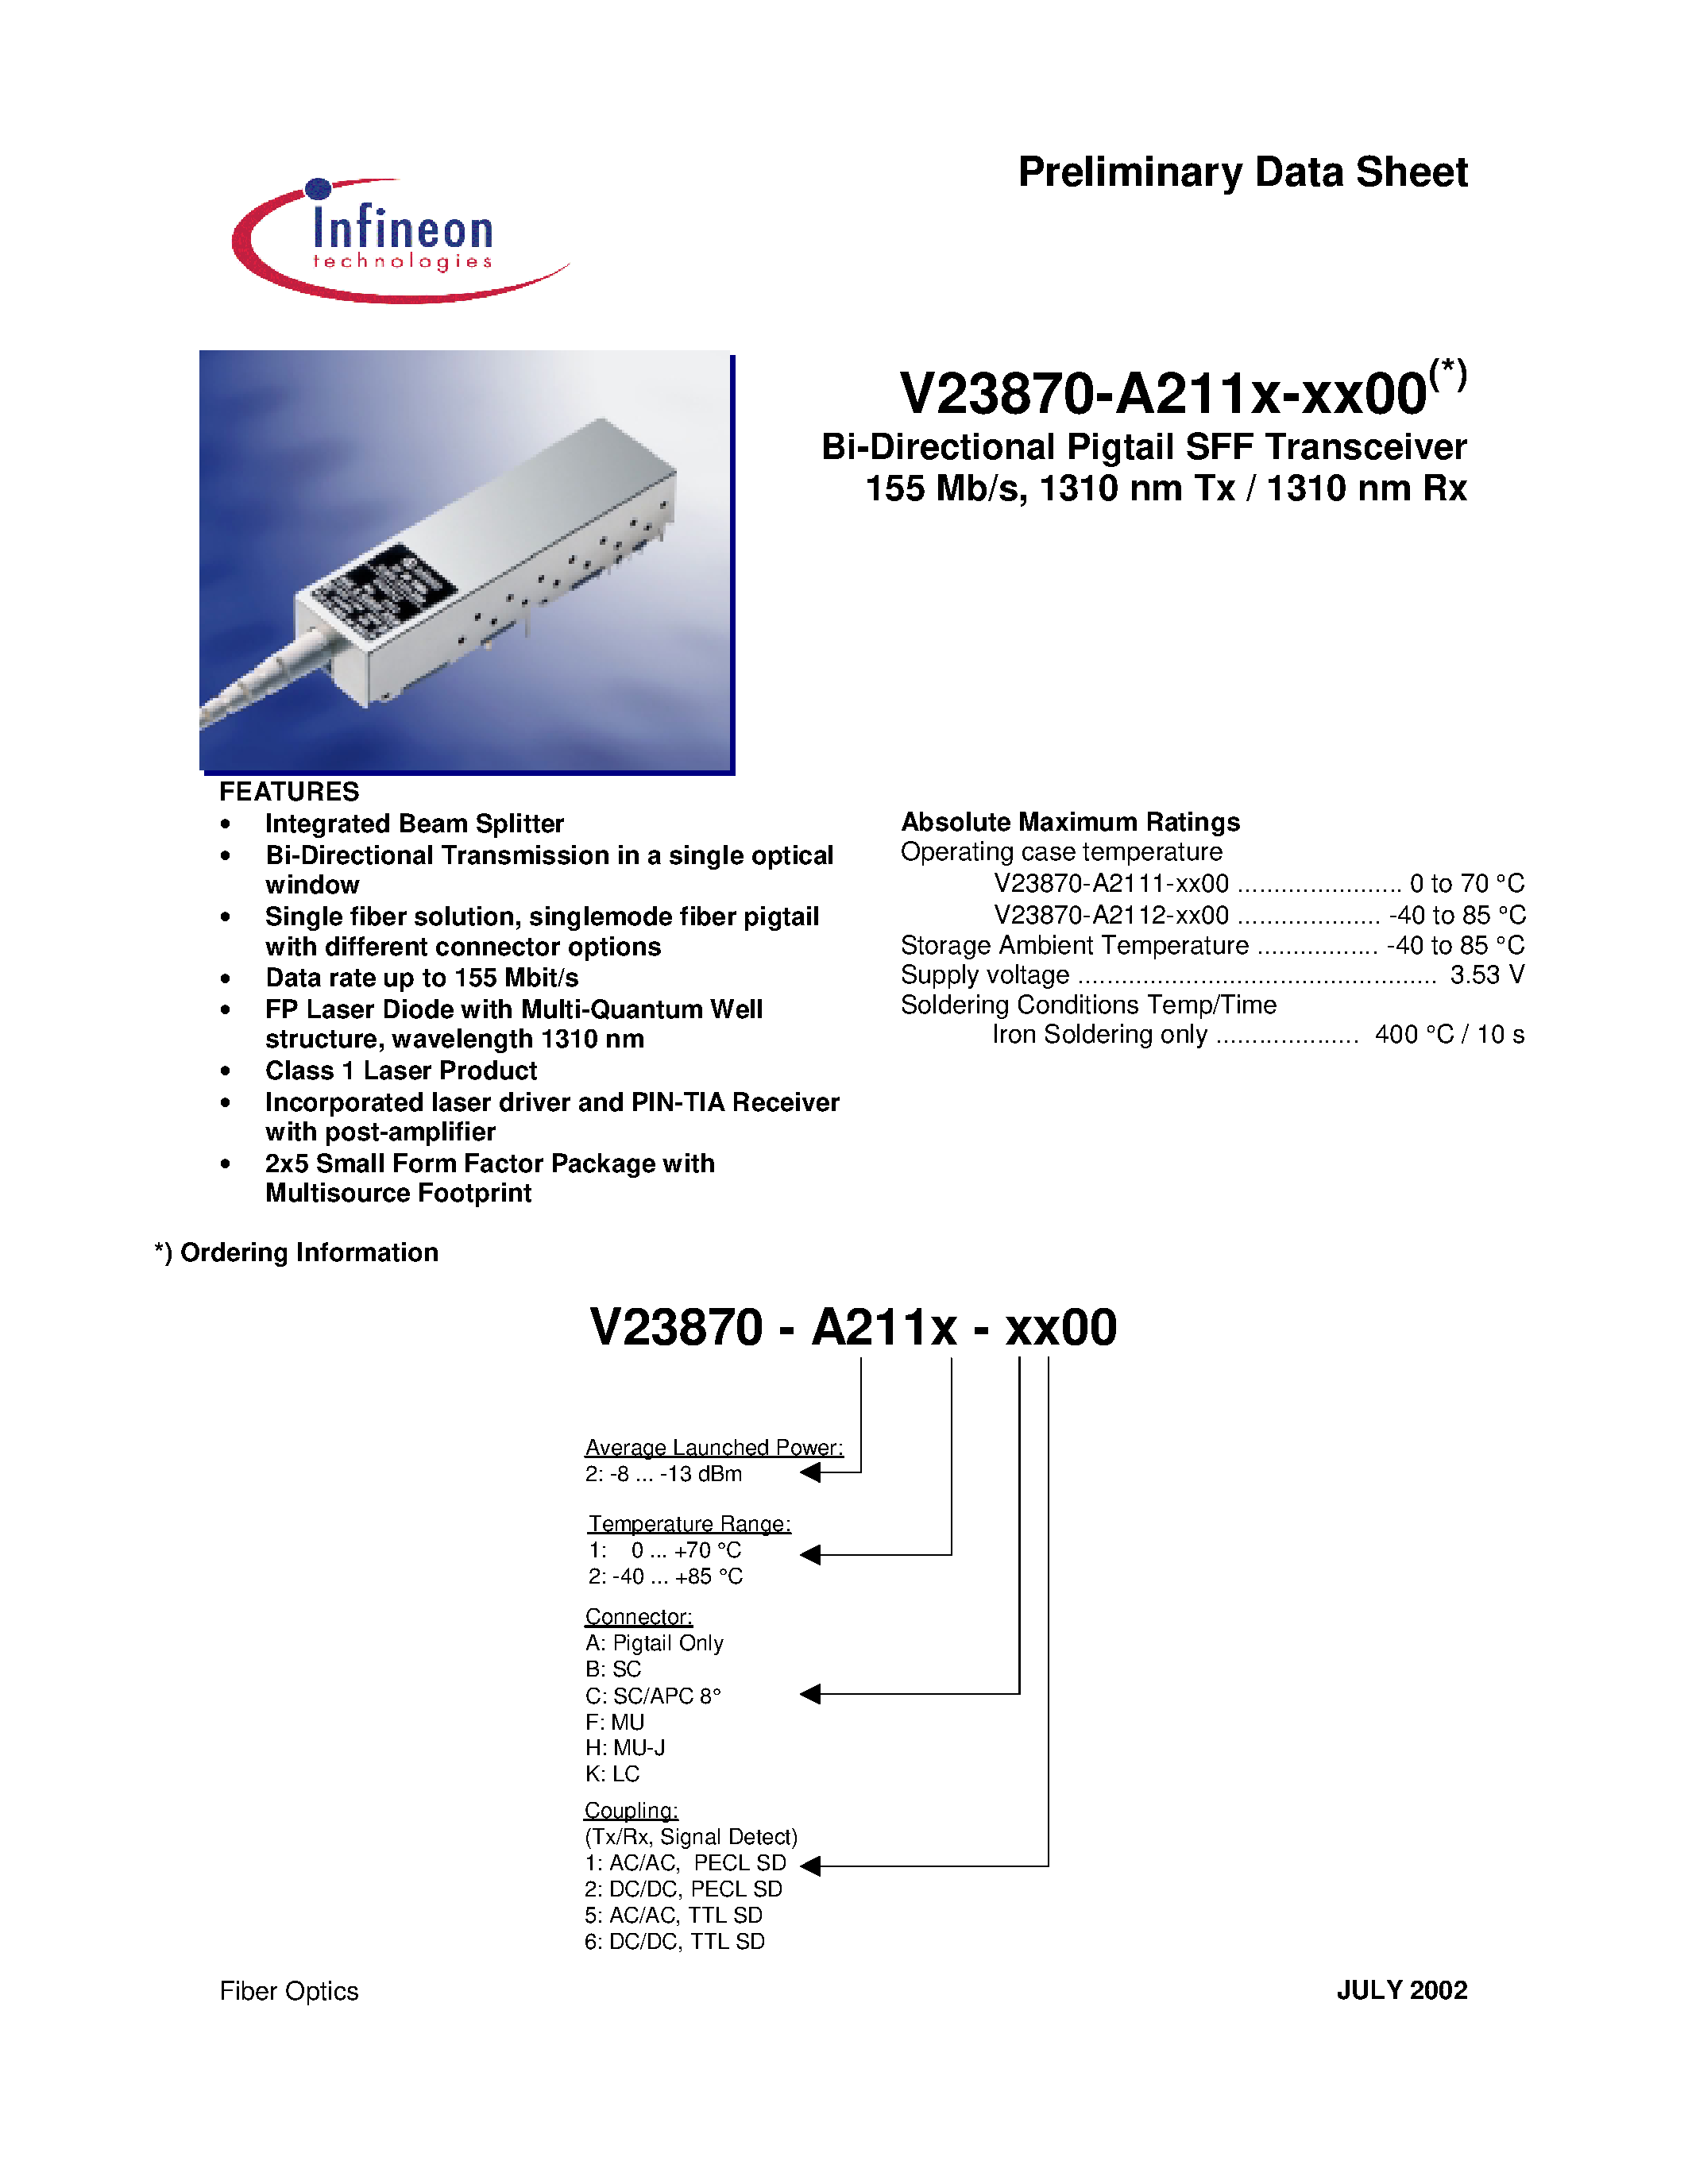 Datasheet V23870-A2112-K200 - Bi-Directional Pigtail SFF Transceiver 155 Mb/s/ 1310 nm Tx / 1310 nm Rx page 1